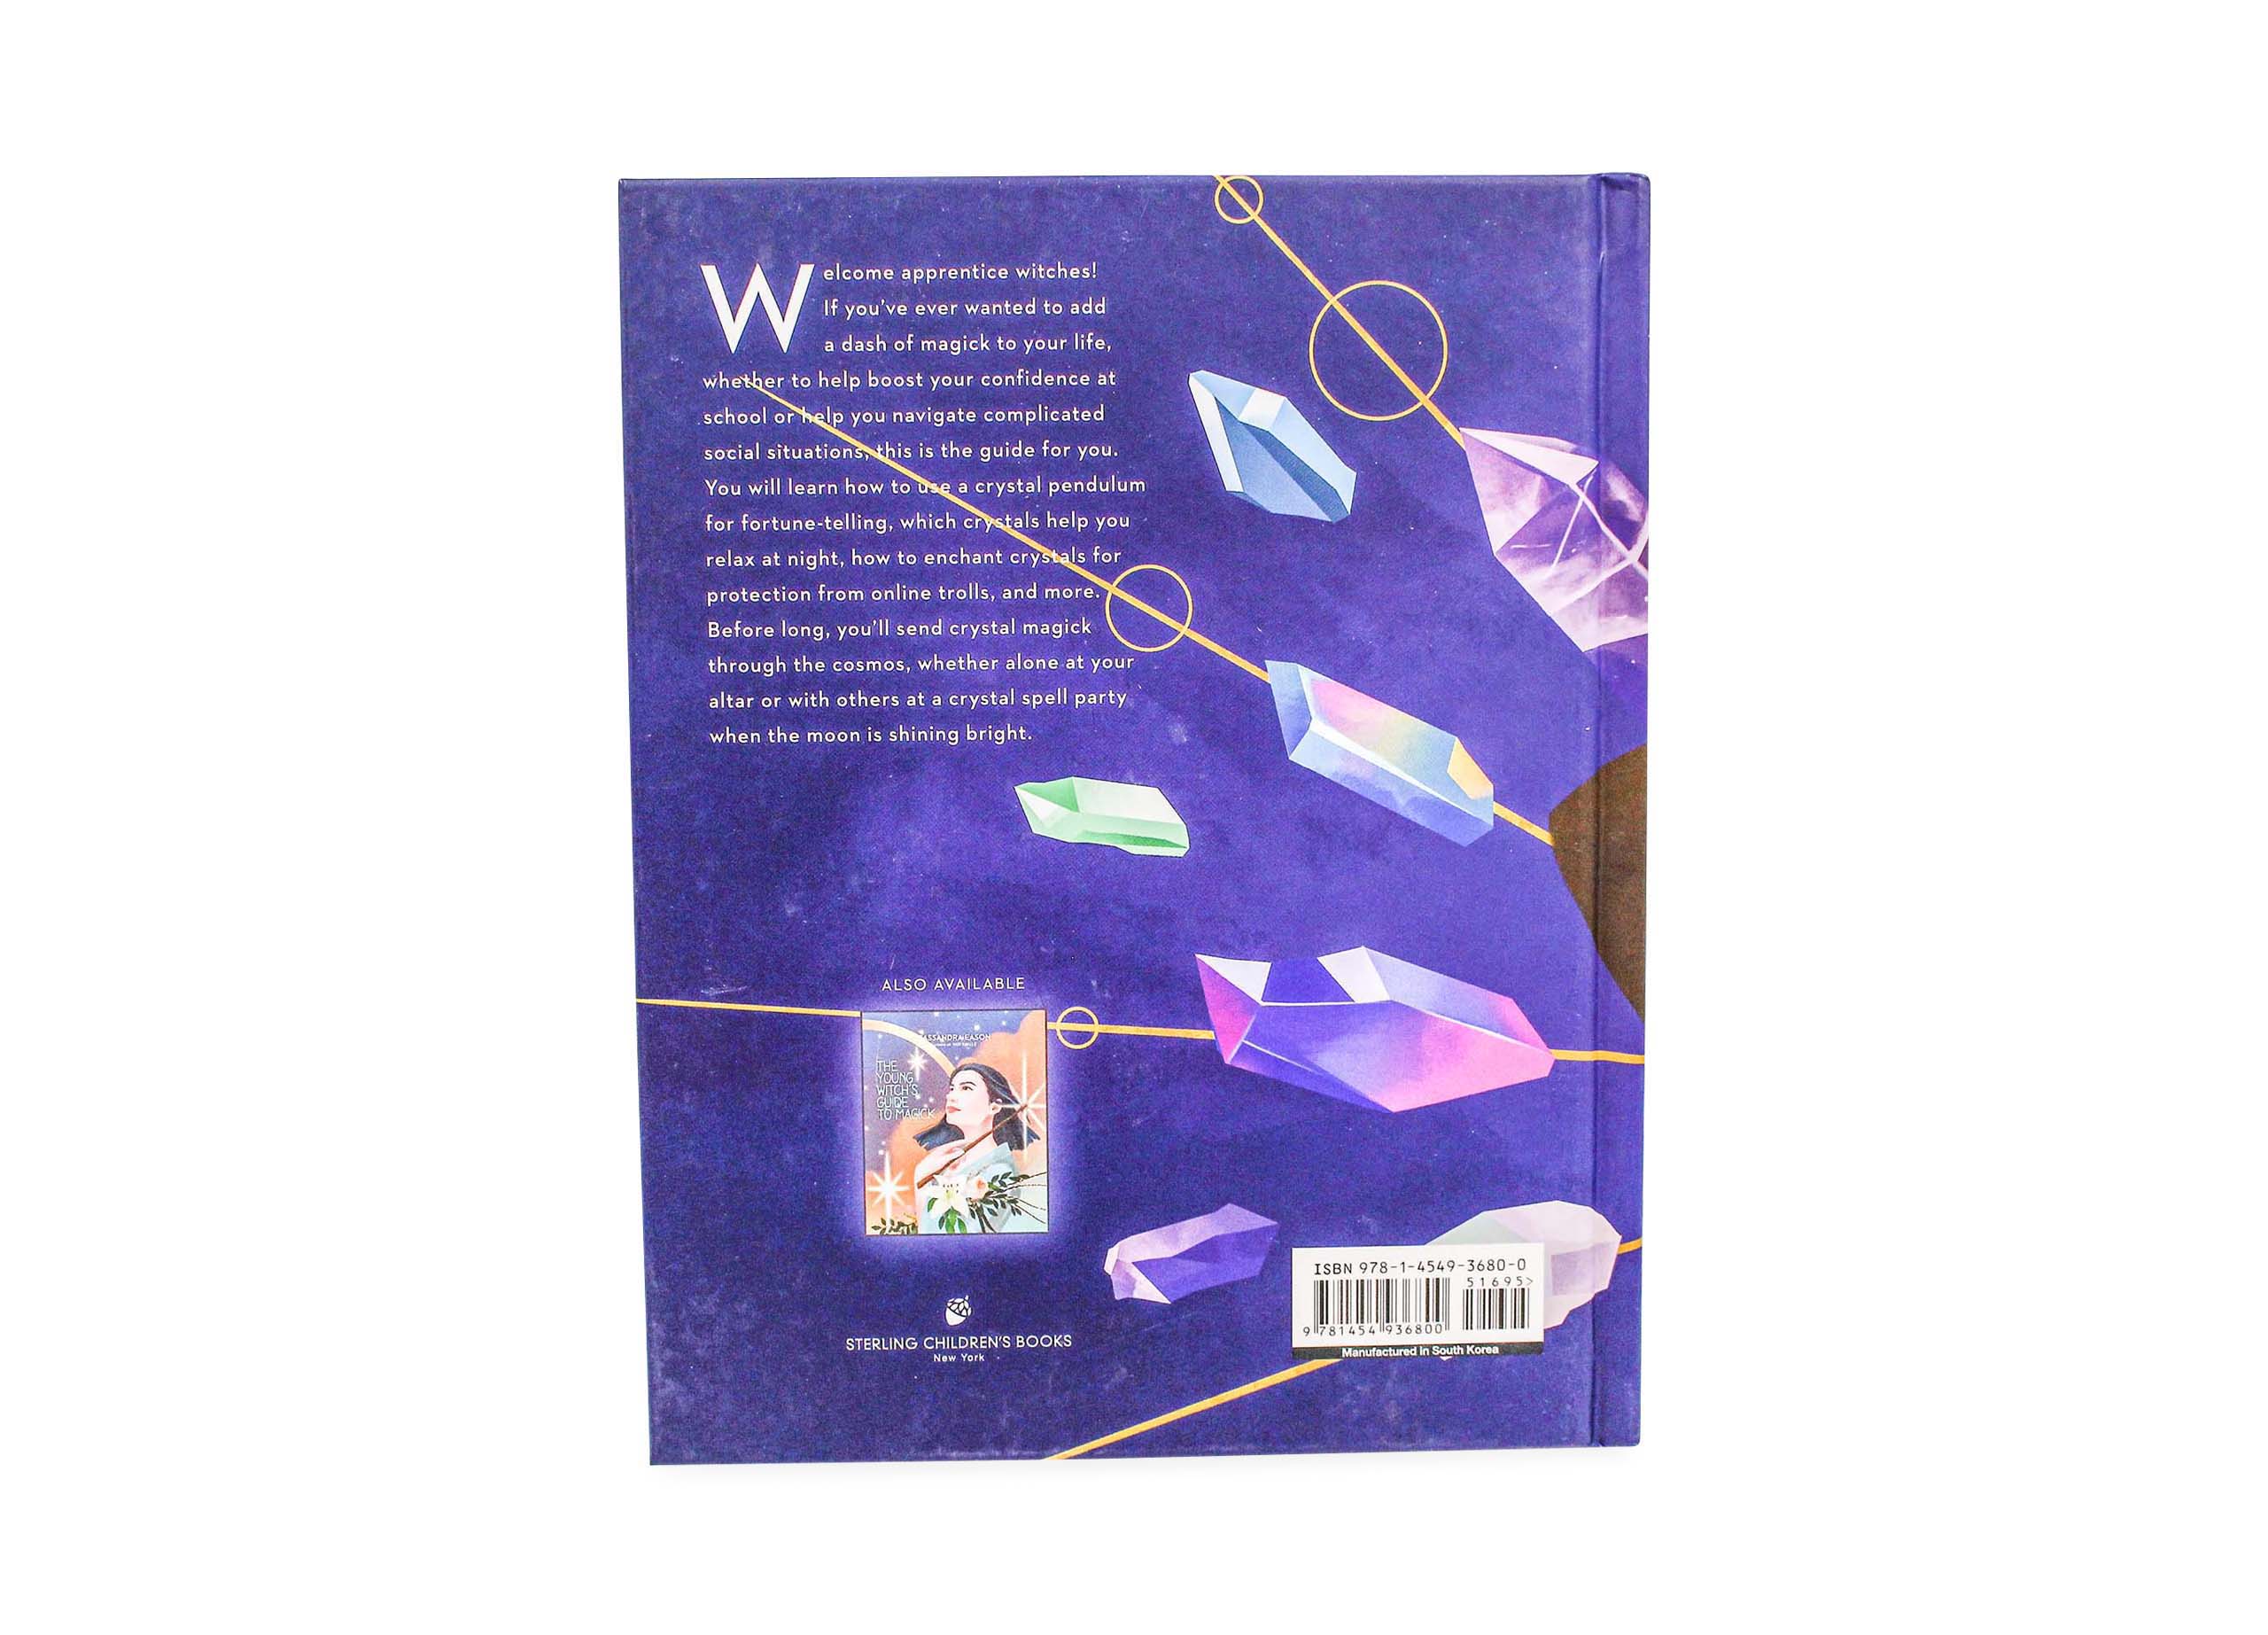 The Young Witch's Guide to Crystals - Books